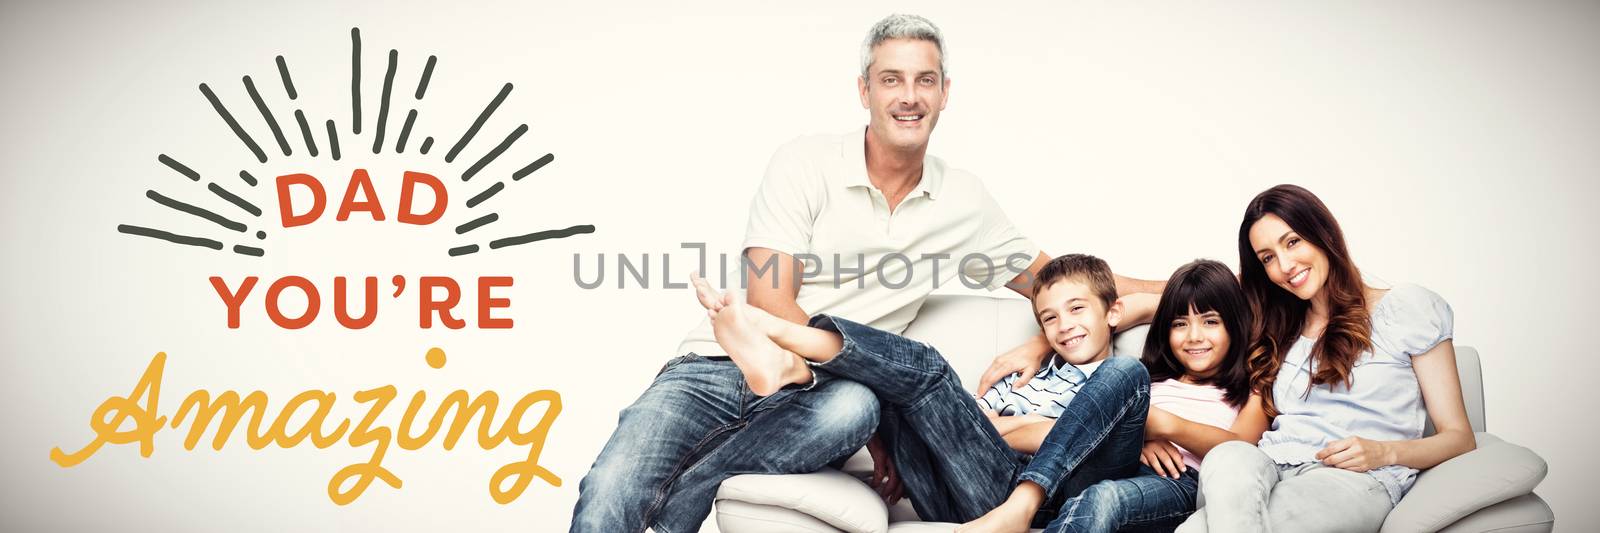 Family sitting on sofa smiling at camera  against close up of dad you are amazing text